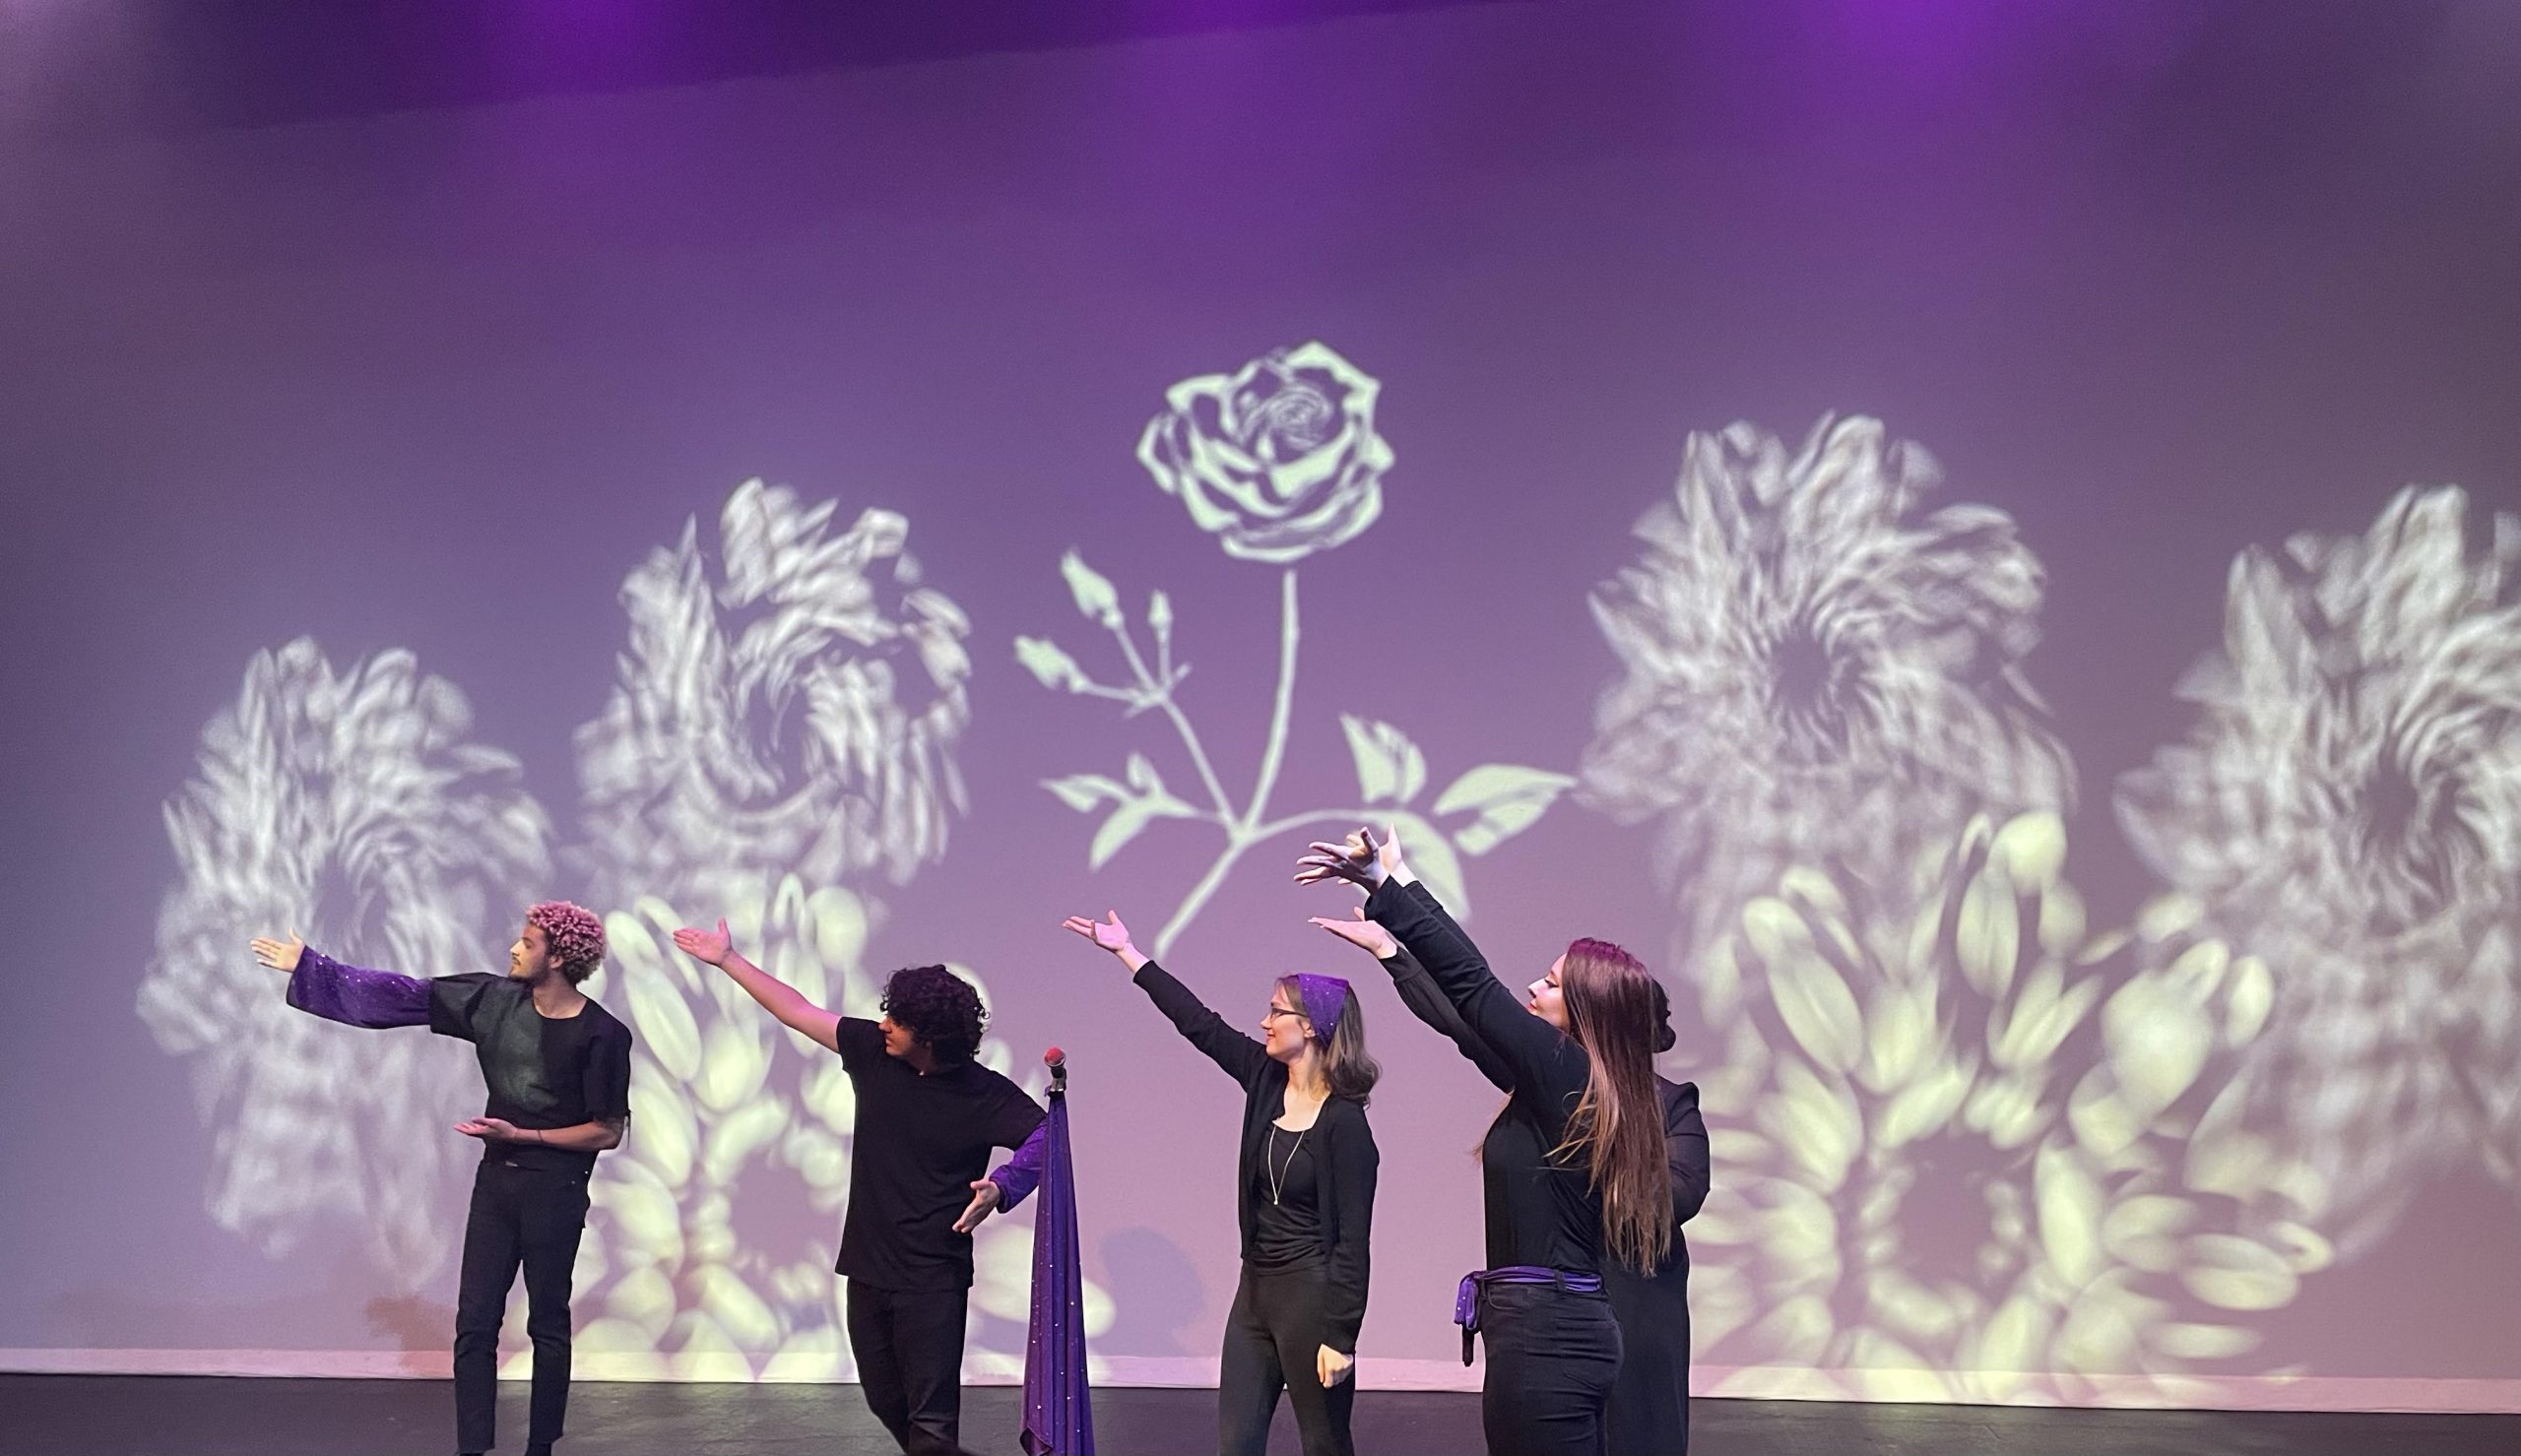 PHOTO: Image depicts casts of “The White Rose of Tejas” performers pictured from left to right: Walter McNairy, Gabriel Ismail, Mikayla Cooney, Sirena Gonzales and Ayeka Potter. The performers stand with their hands up in front of a purple backdrop, with white roses on the walls. Photo by The Signal Managing Editor of Content & Operations.